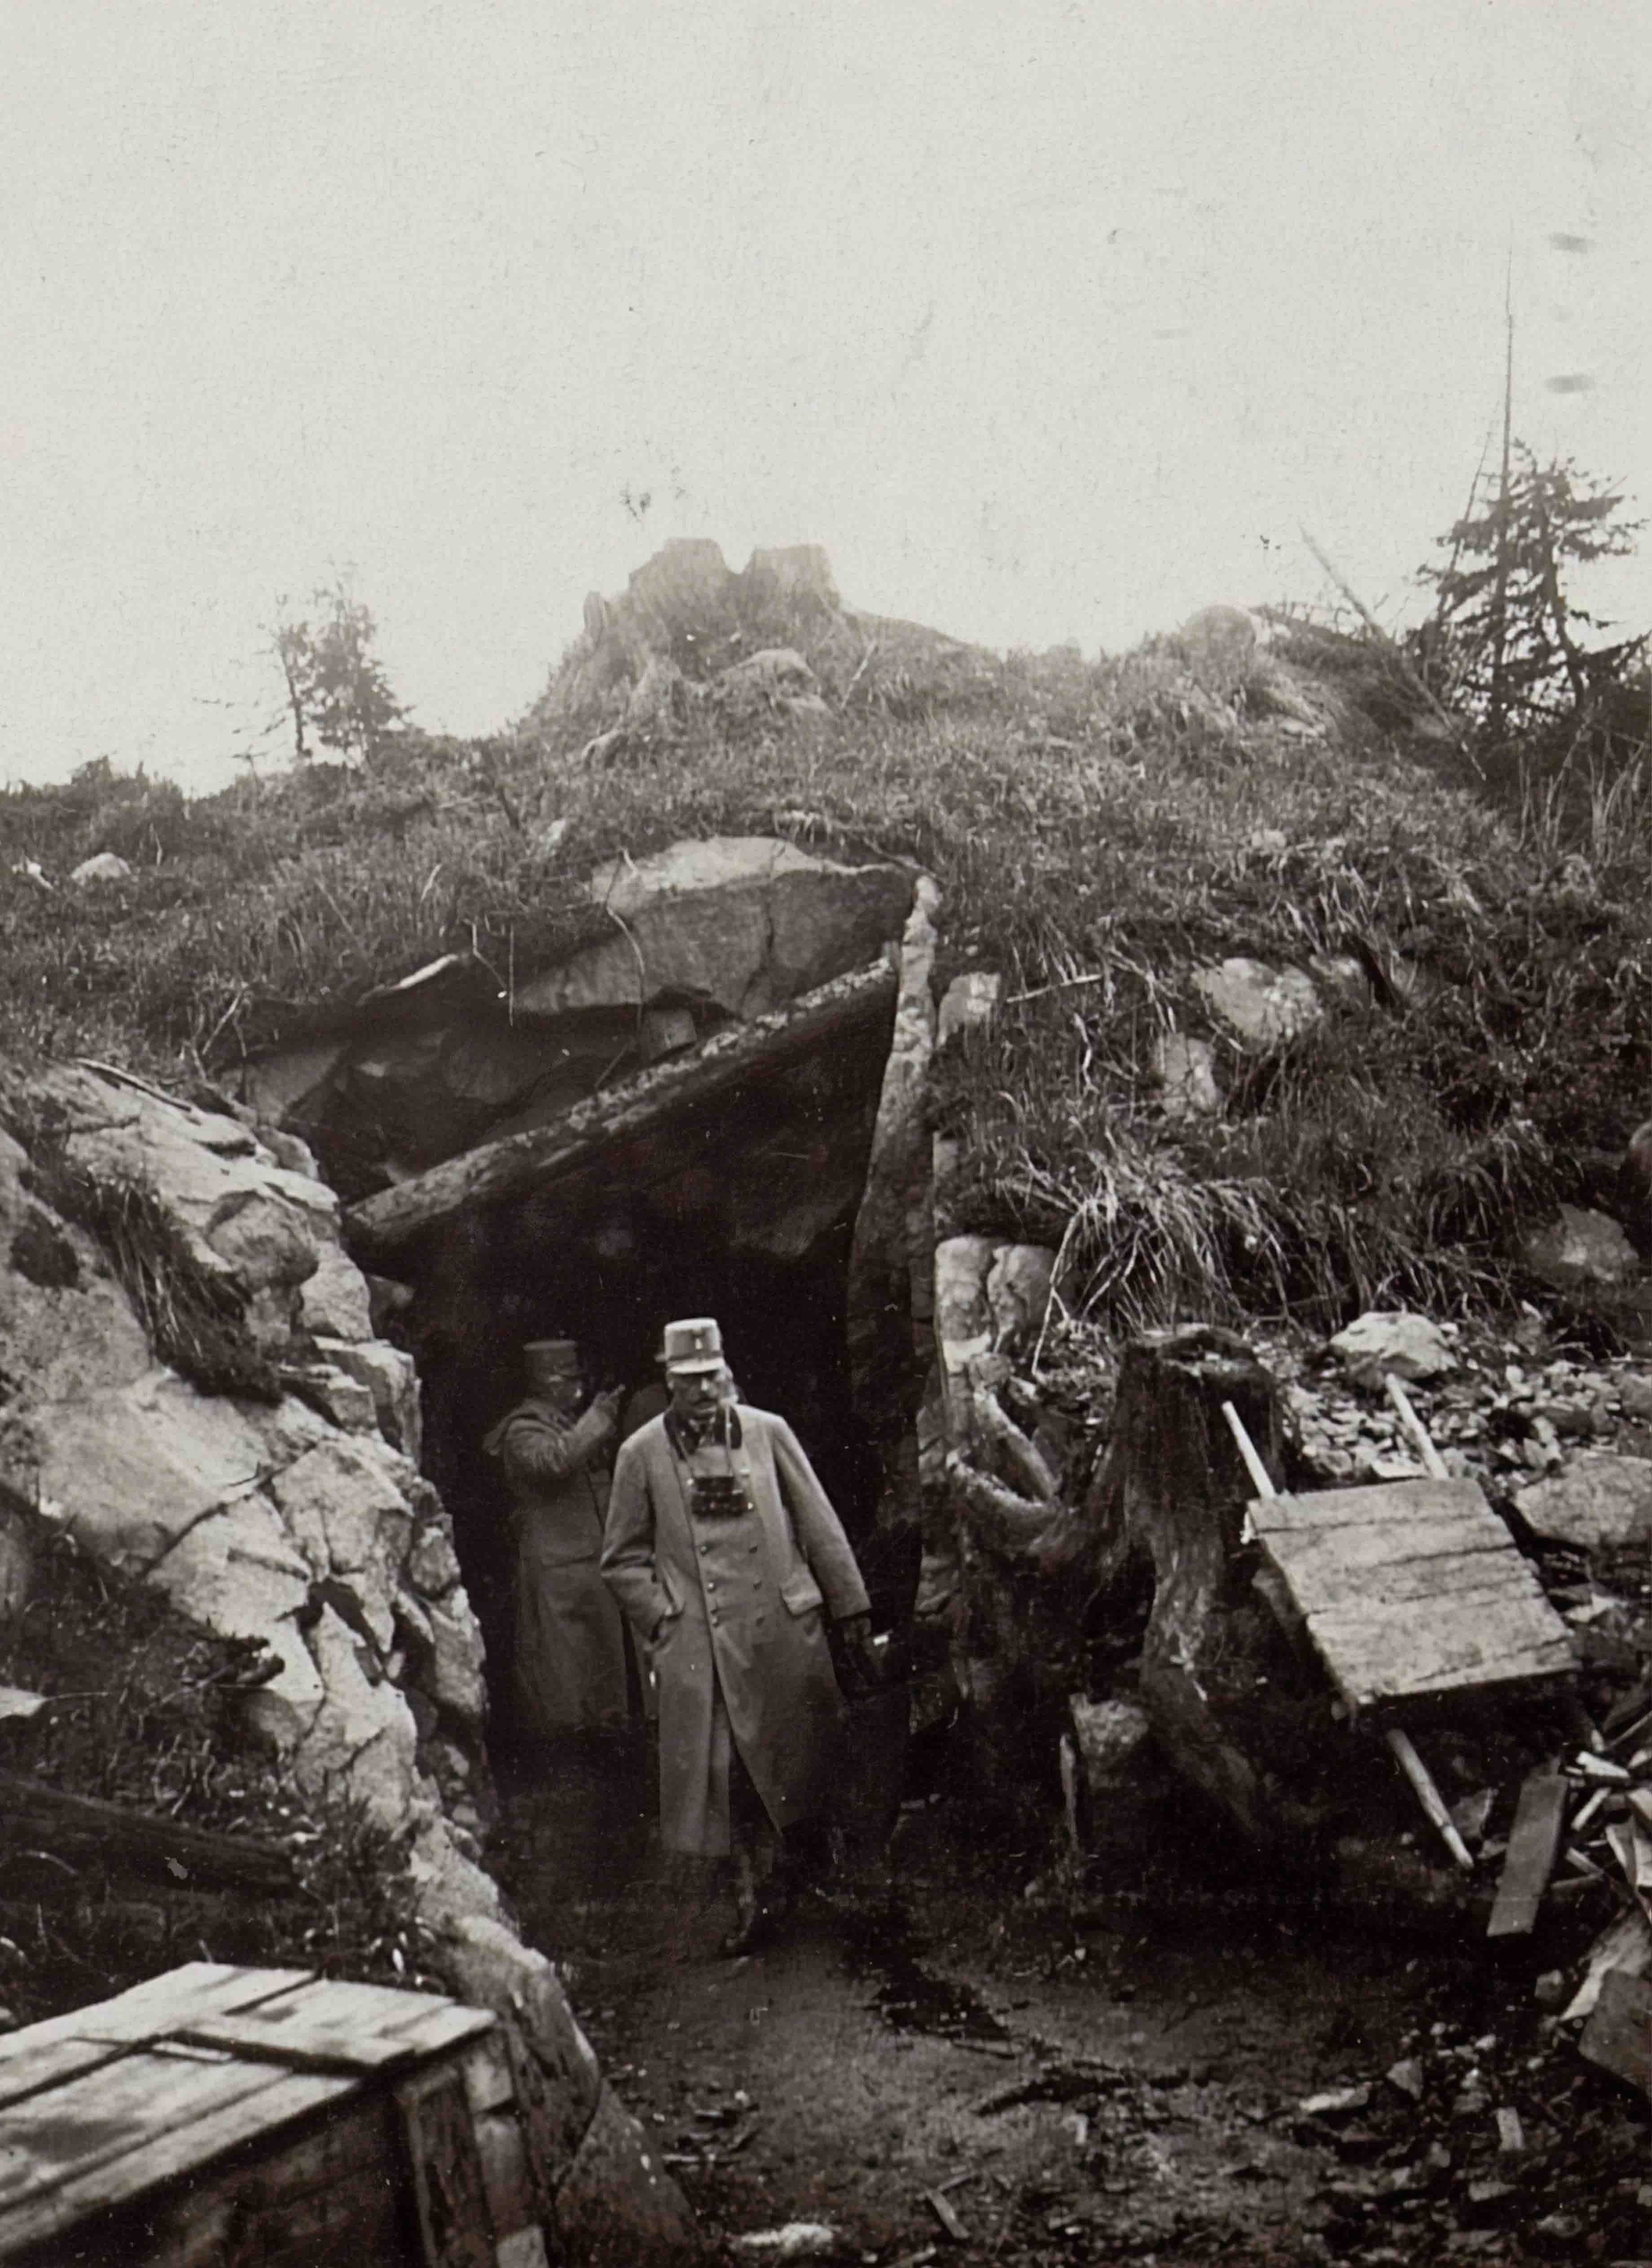 Two soldiers coming out of a tunnel with crates and debris around them